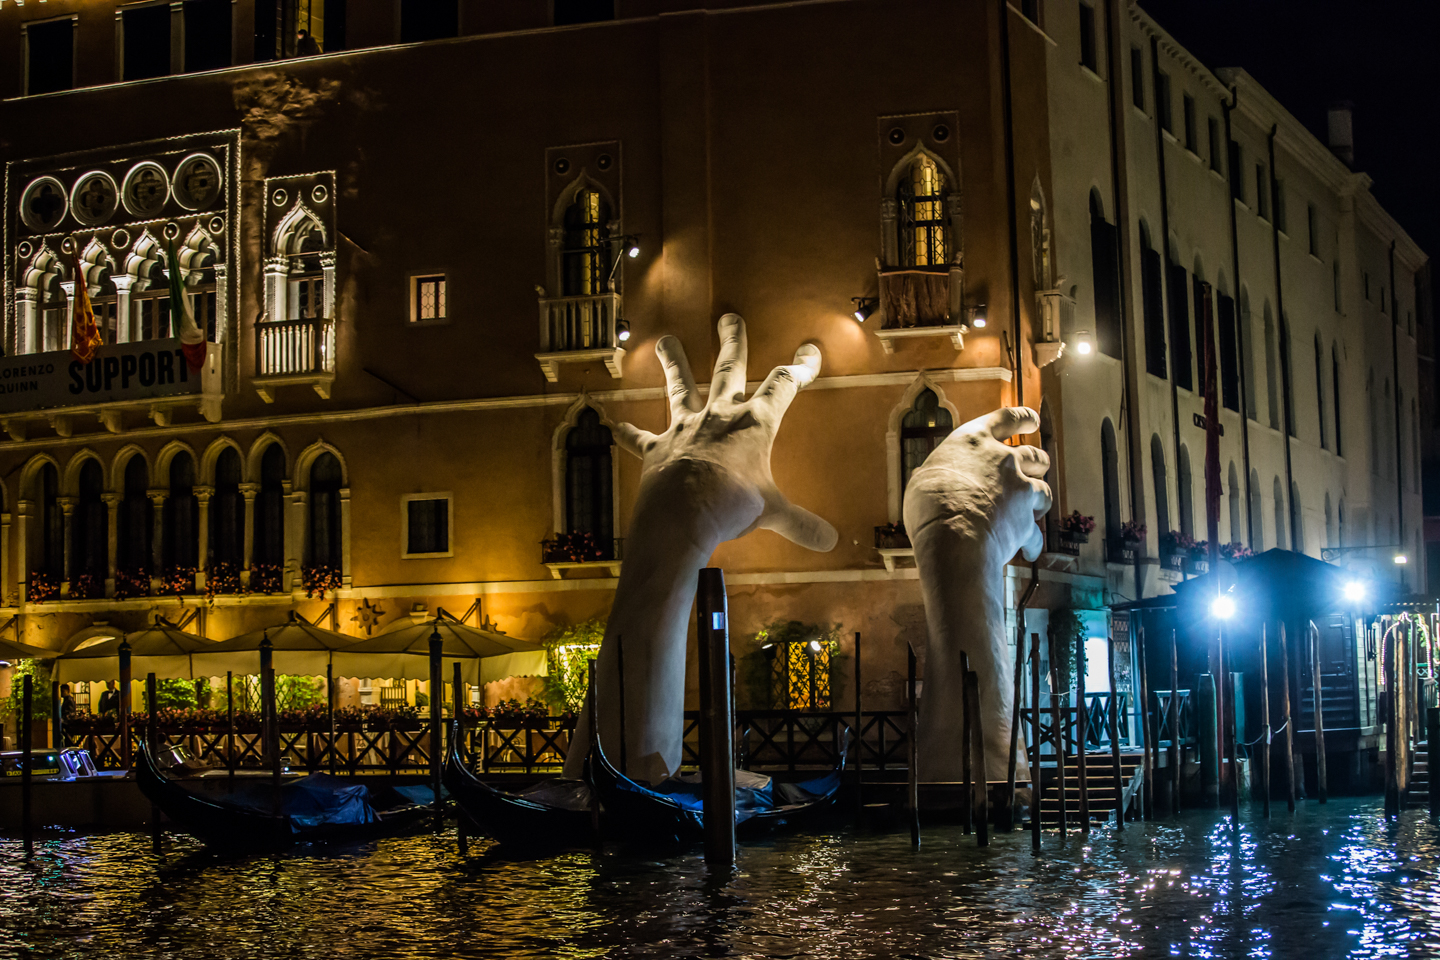 the giant hands sculpture in Venice by Lorenzo Quinn called "Support"